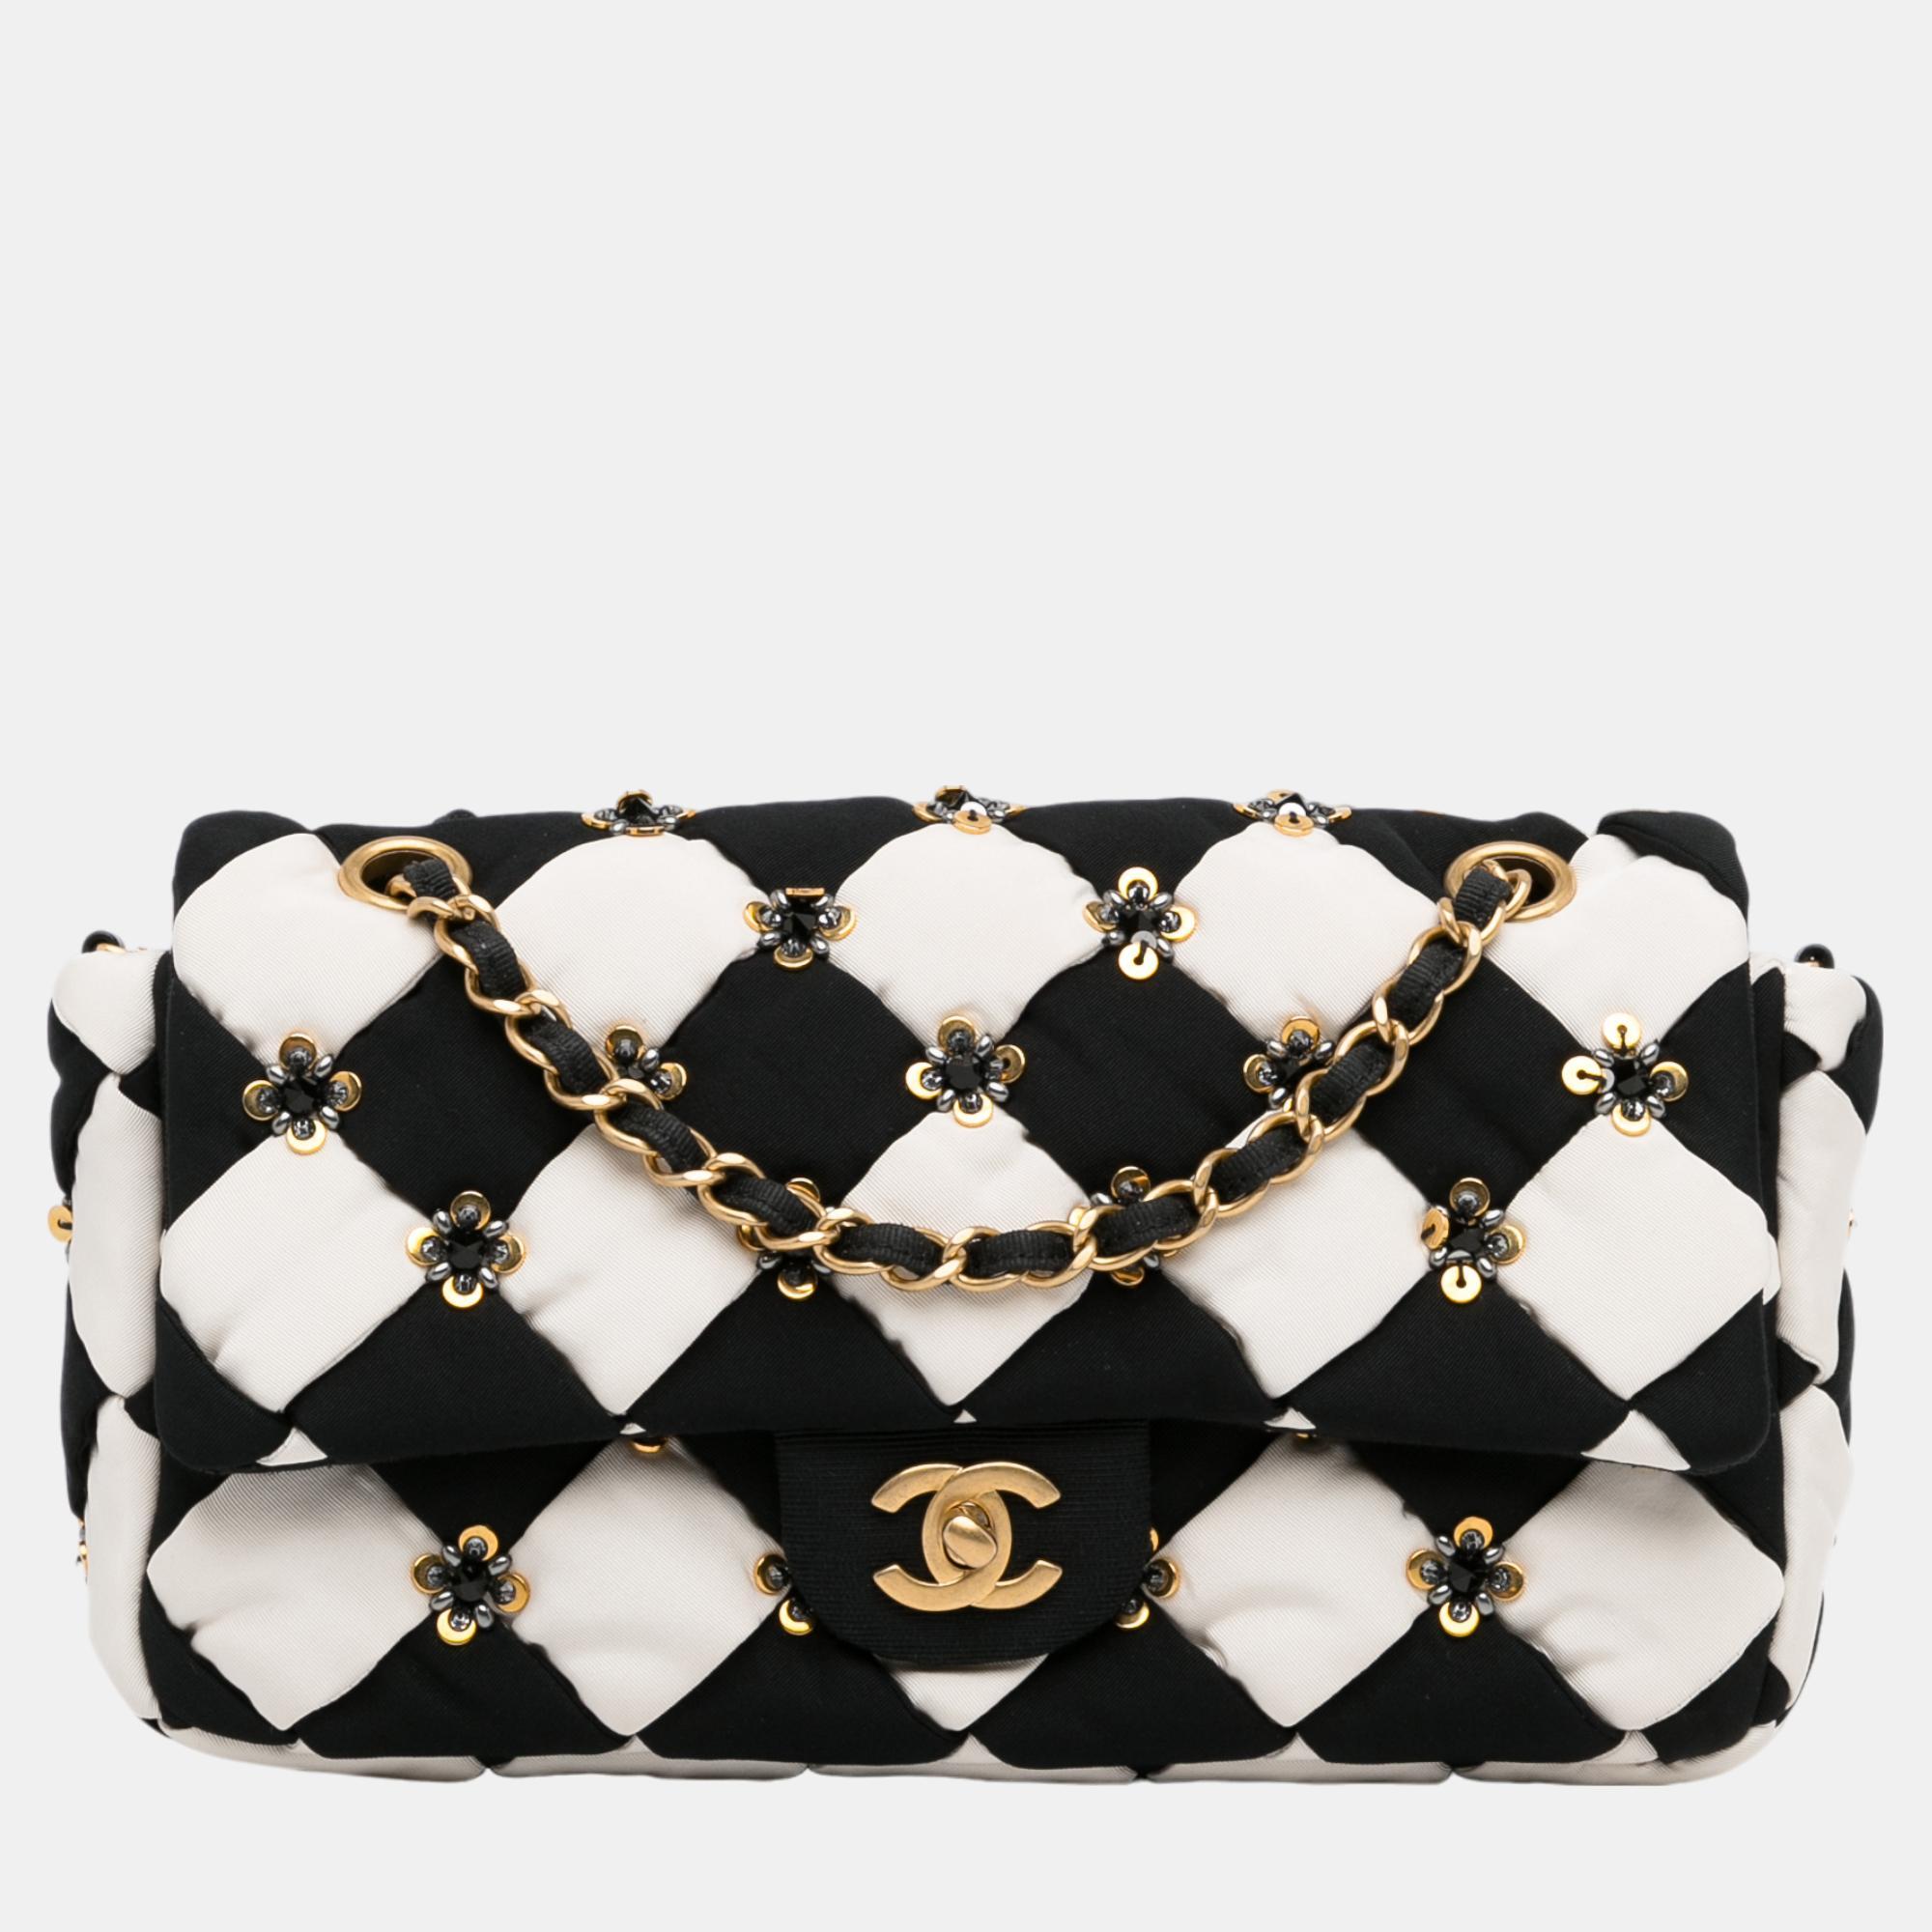 Chanel black/white medium satin m&eacute;tiers d&rsquo;art checkered embellished flap